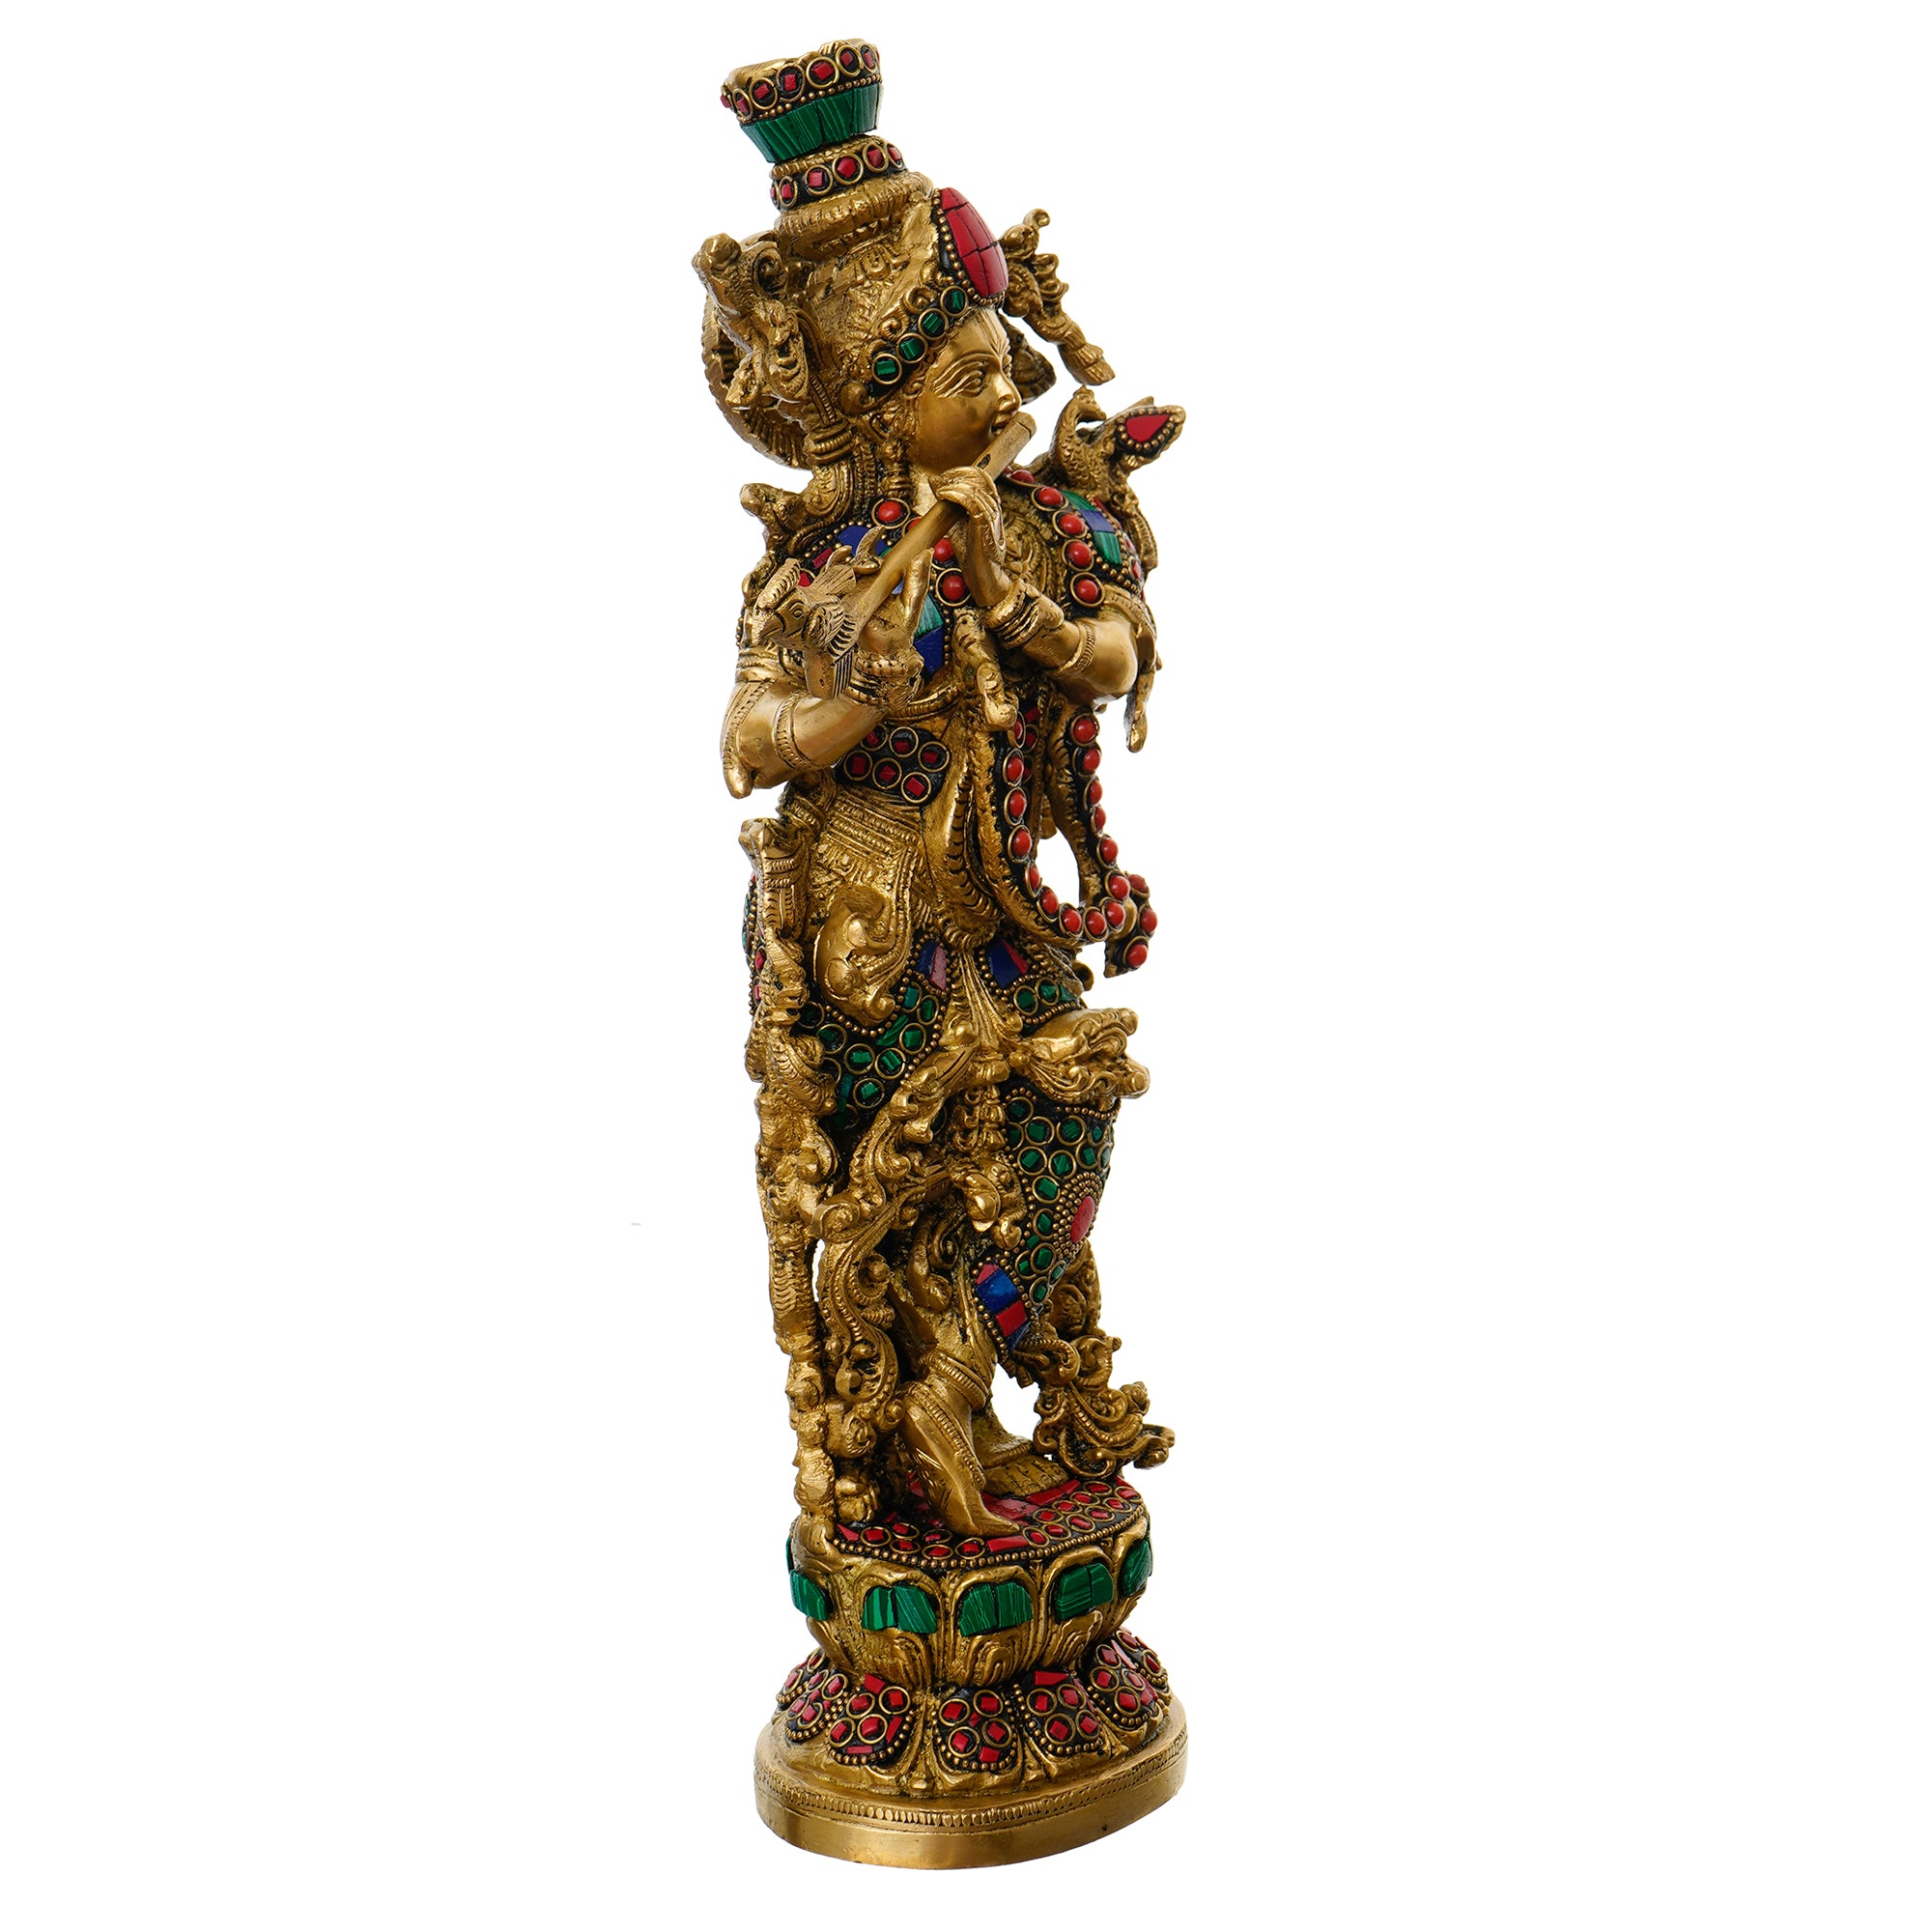 Golden Lord Krishna Playing Flute Handcrafted Brass Idol with Colorful Stone Work 5